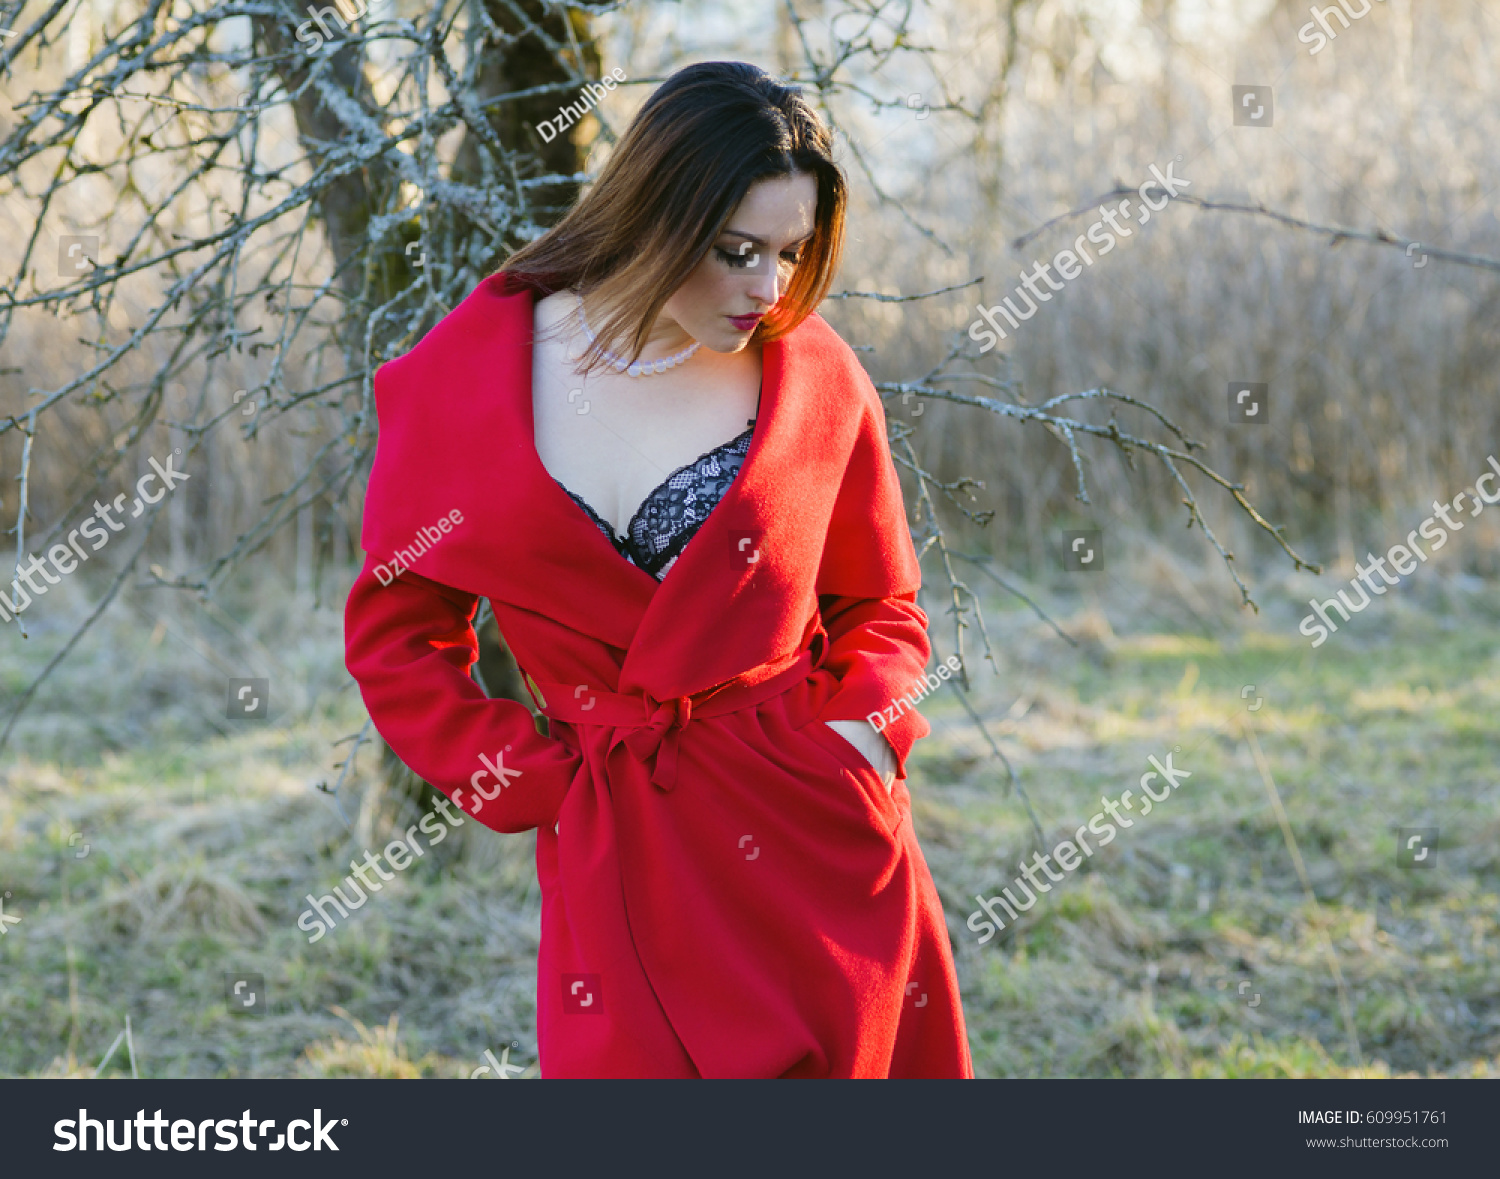 The sexual beauty in a red coat, the erotic nature #609951761